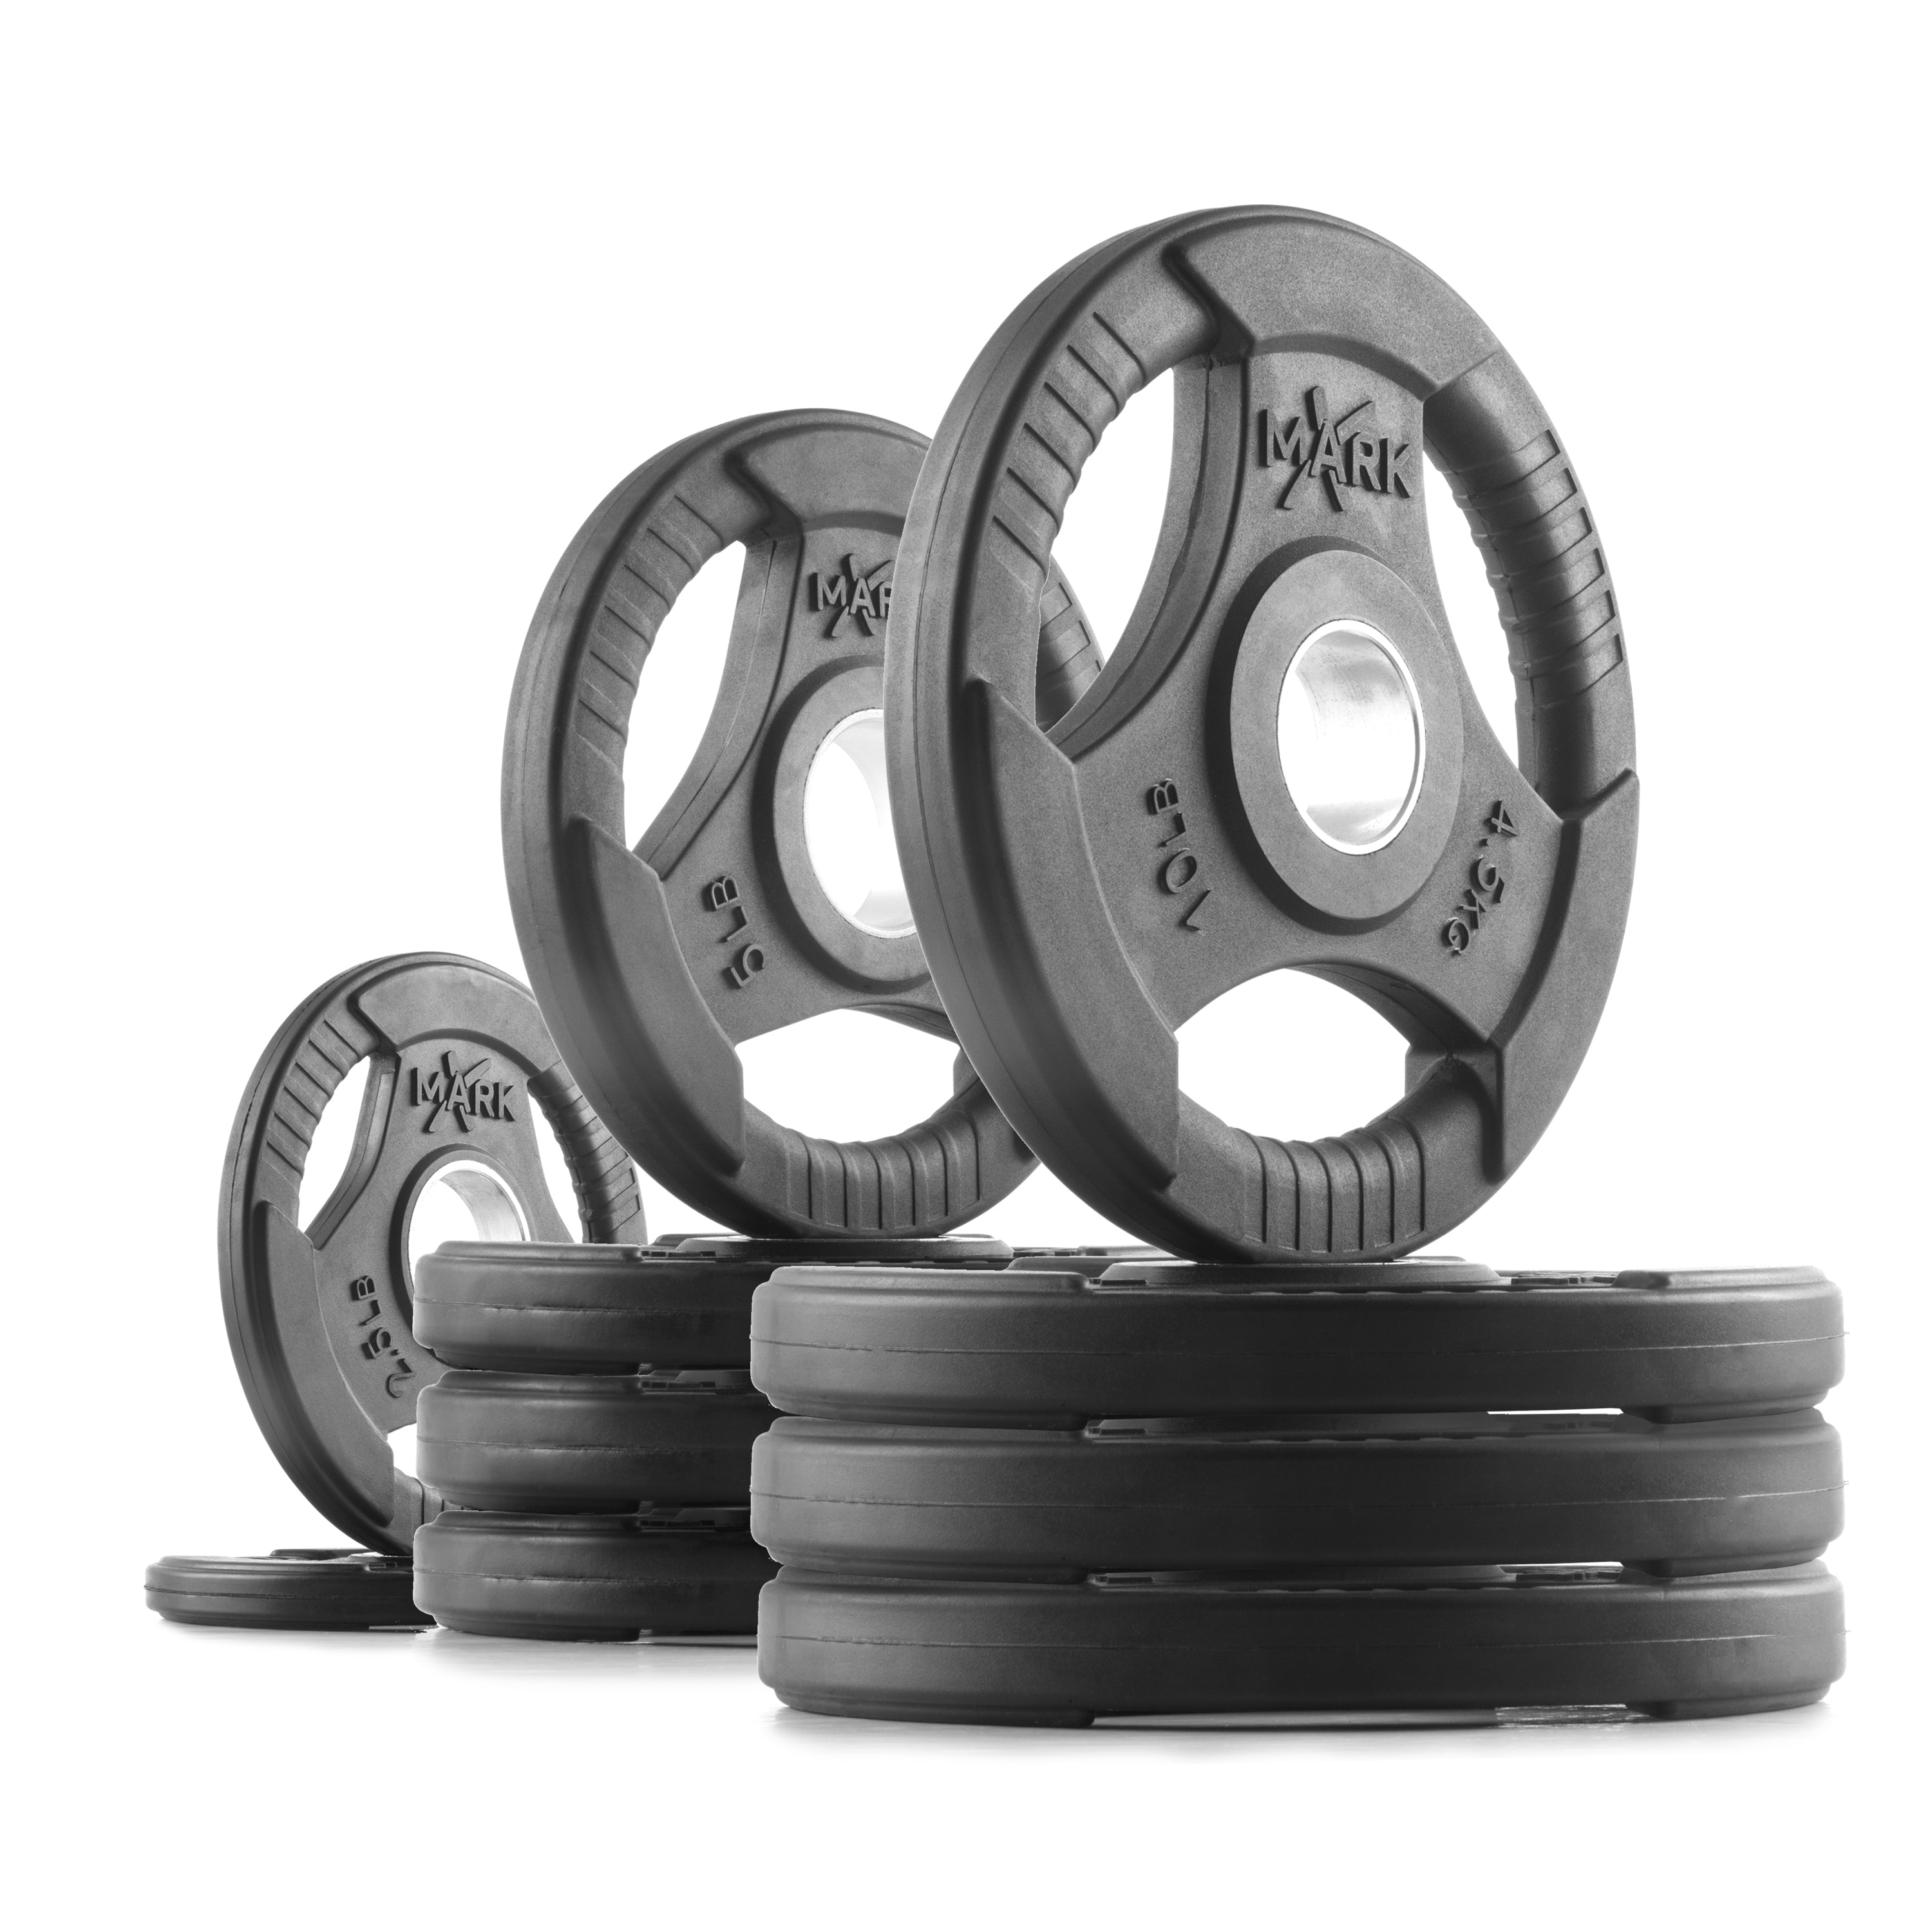 TRI GRIP 65 lb Olympic Weight Plate Set - REFURBISHED